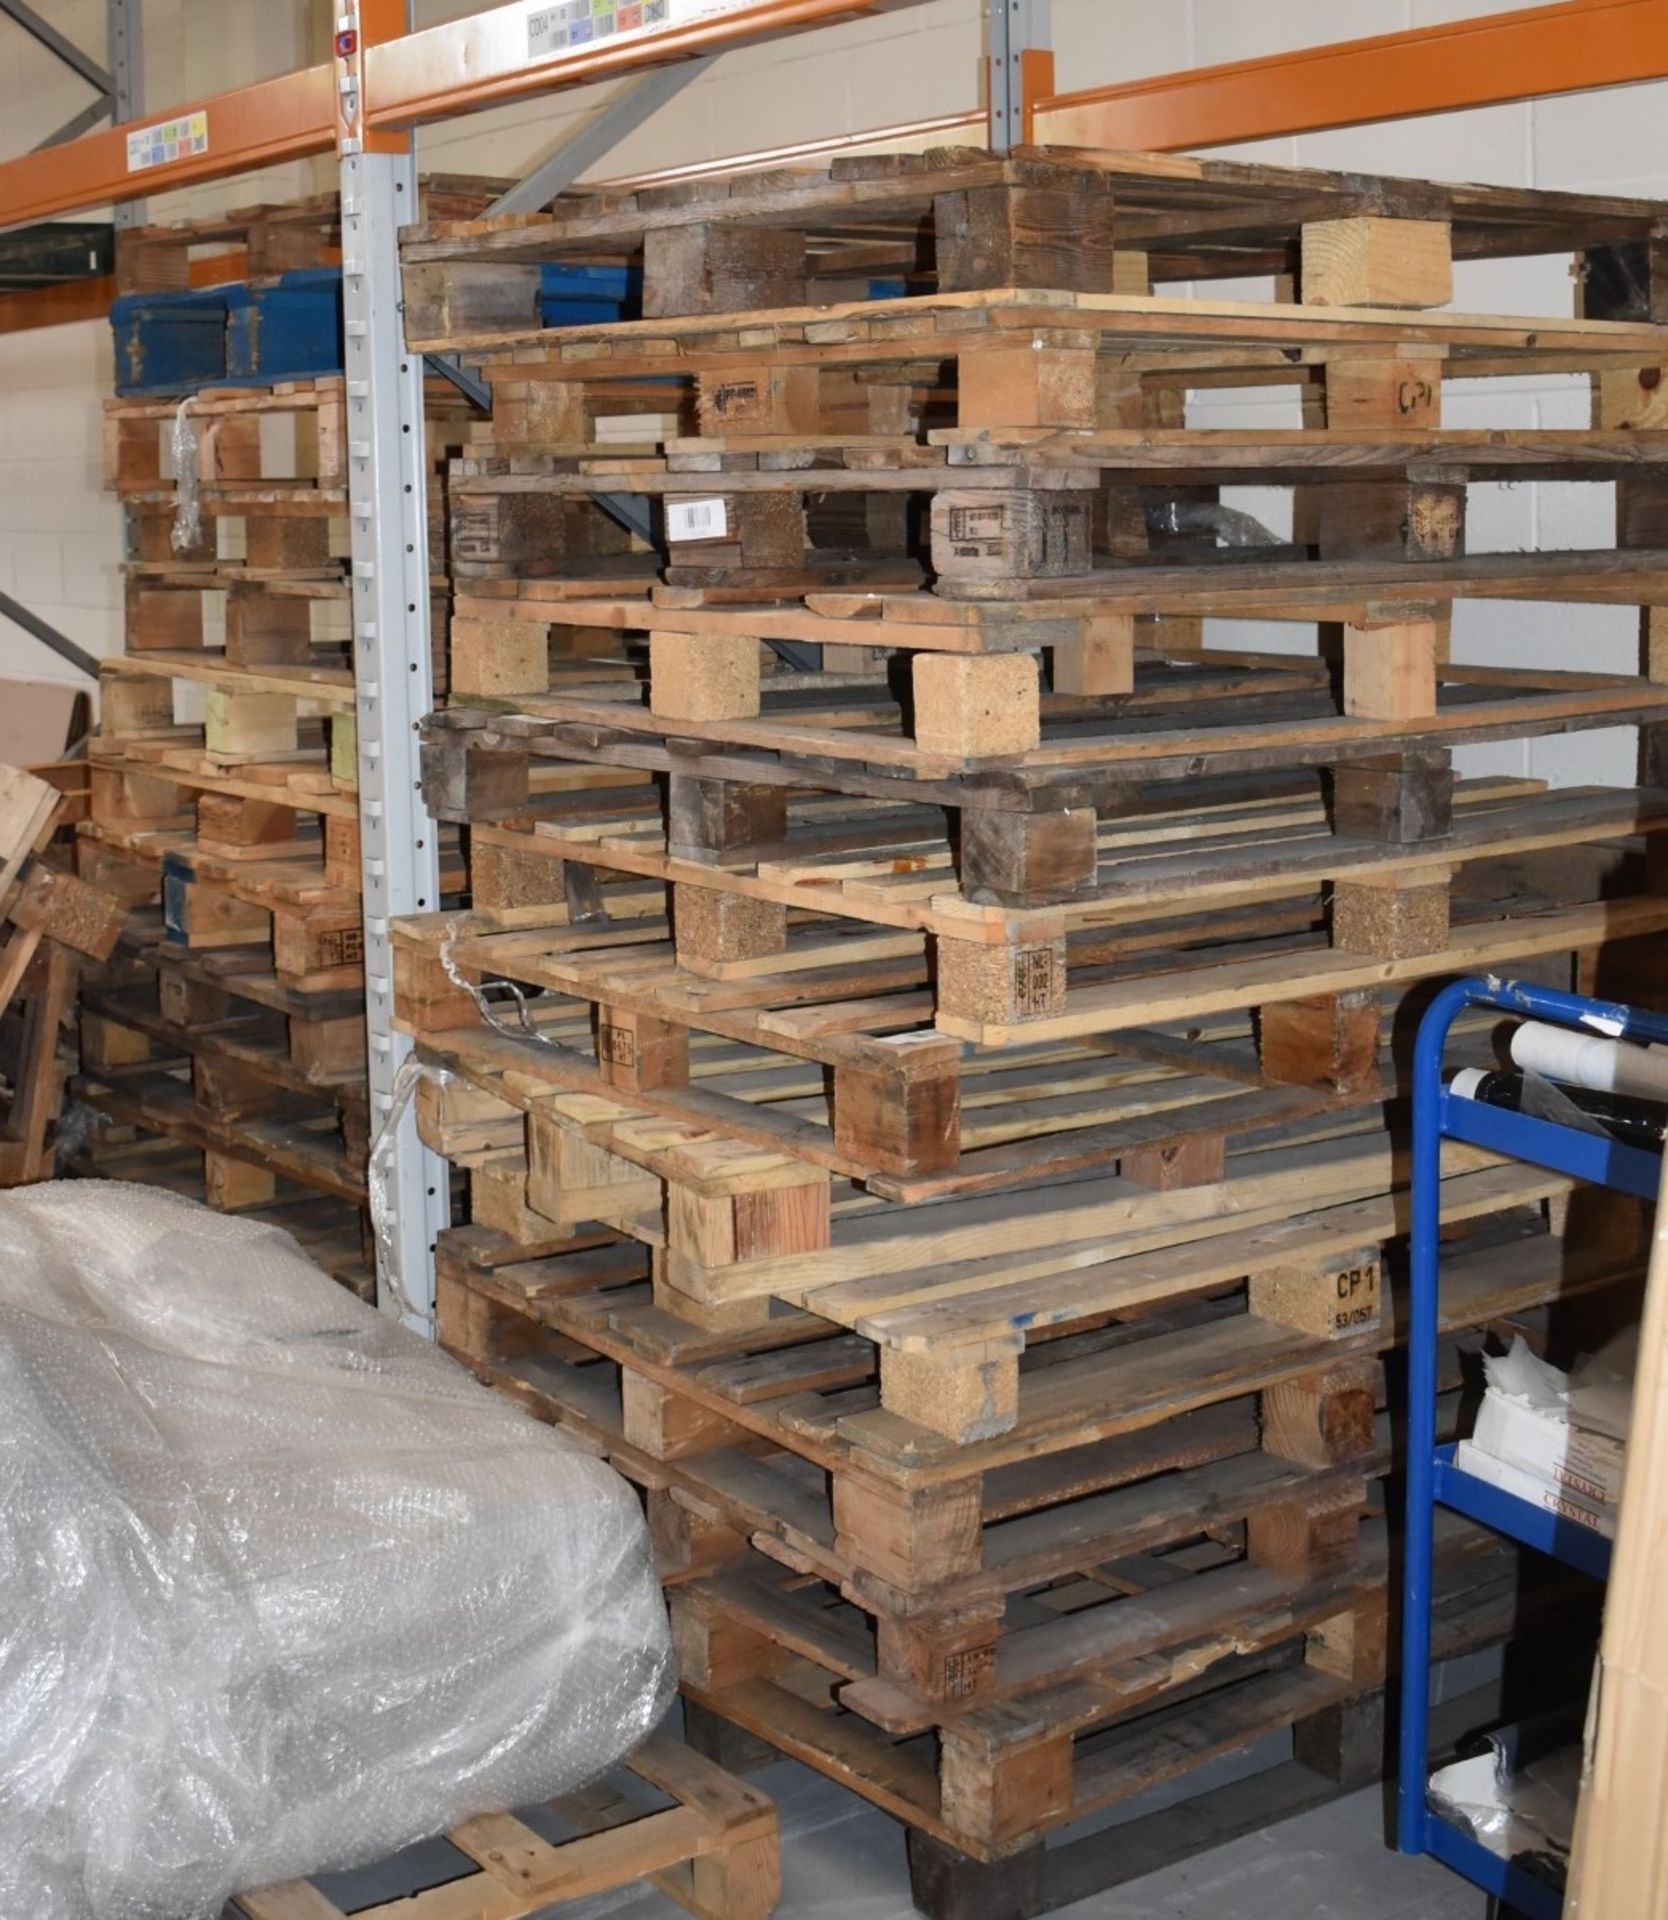 Approx 120 x UK Sized Pallets - 120 x 100 cm Wooden Pallets From Warehouse Clearance - The Pallets - Image 9 of 11